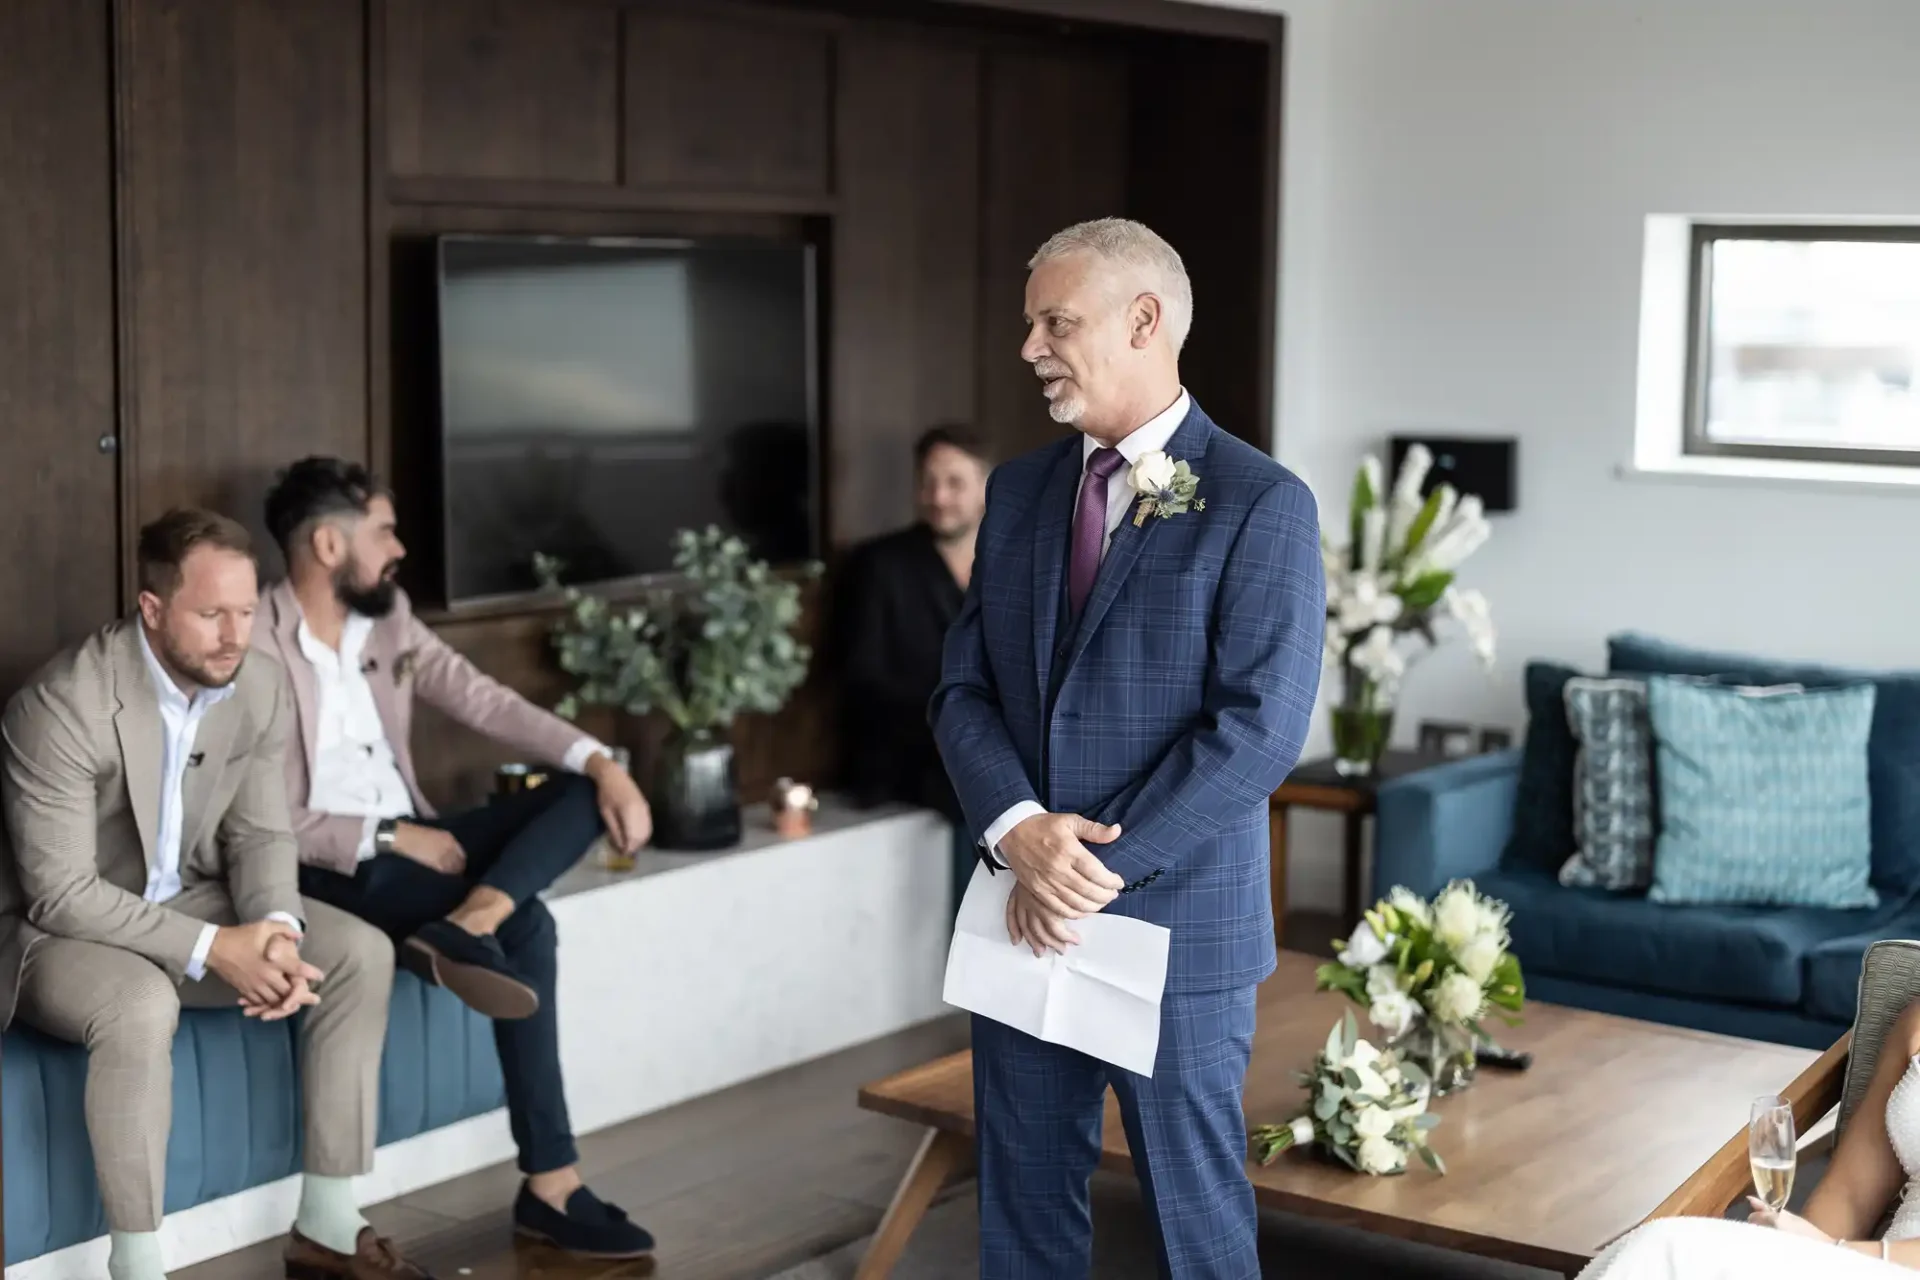 A man in a suit stands with a speech in hand at a wedding, while three guests listen attentively in a cozy living room.